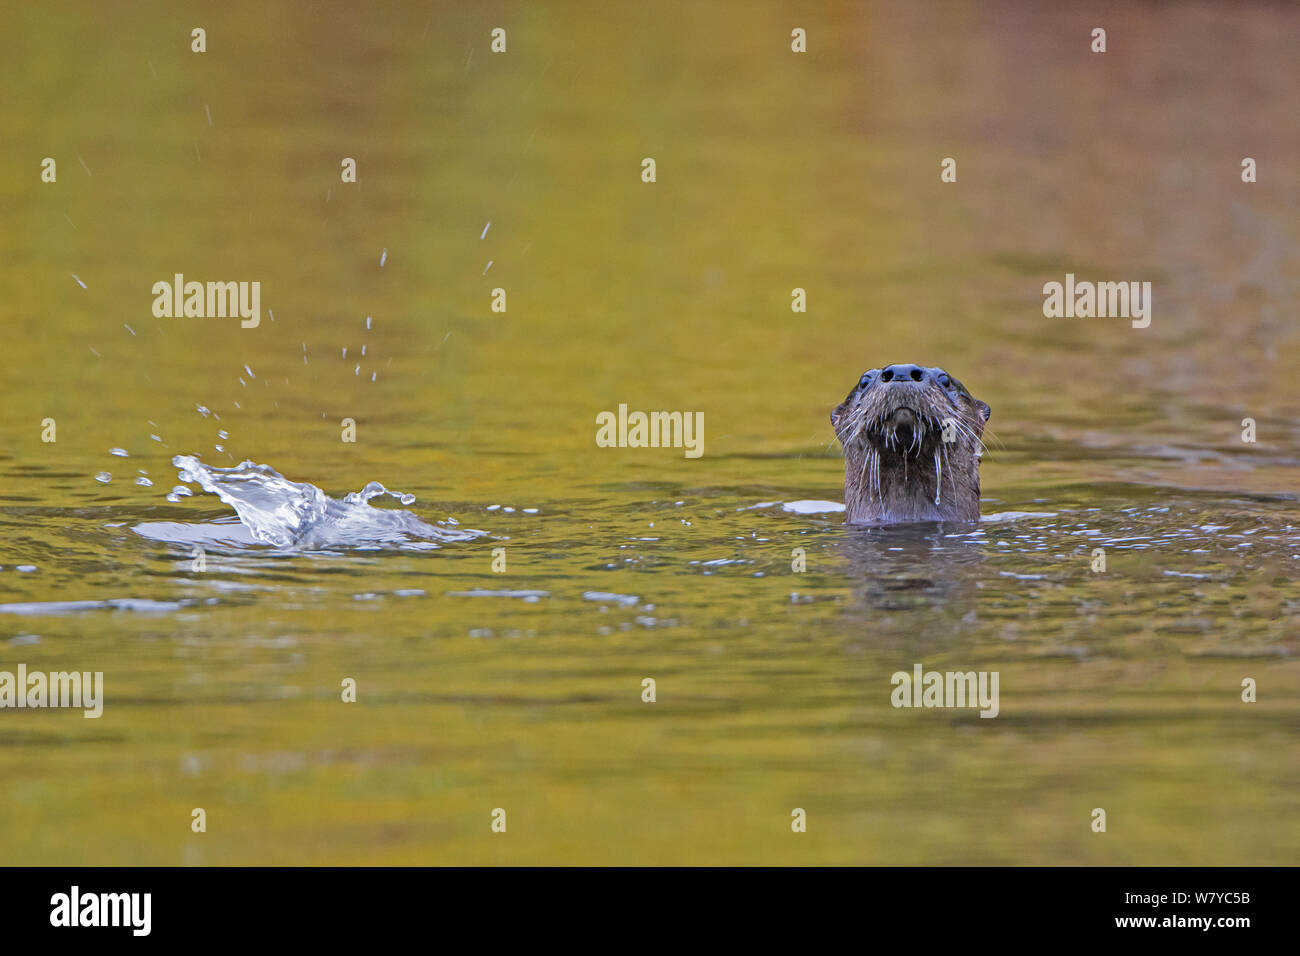 North American river otter (Lontra canadensis) emerging from water, Acadia National Park, Maine, USA, October. Stock Photo